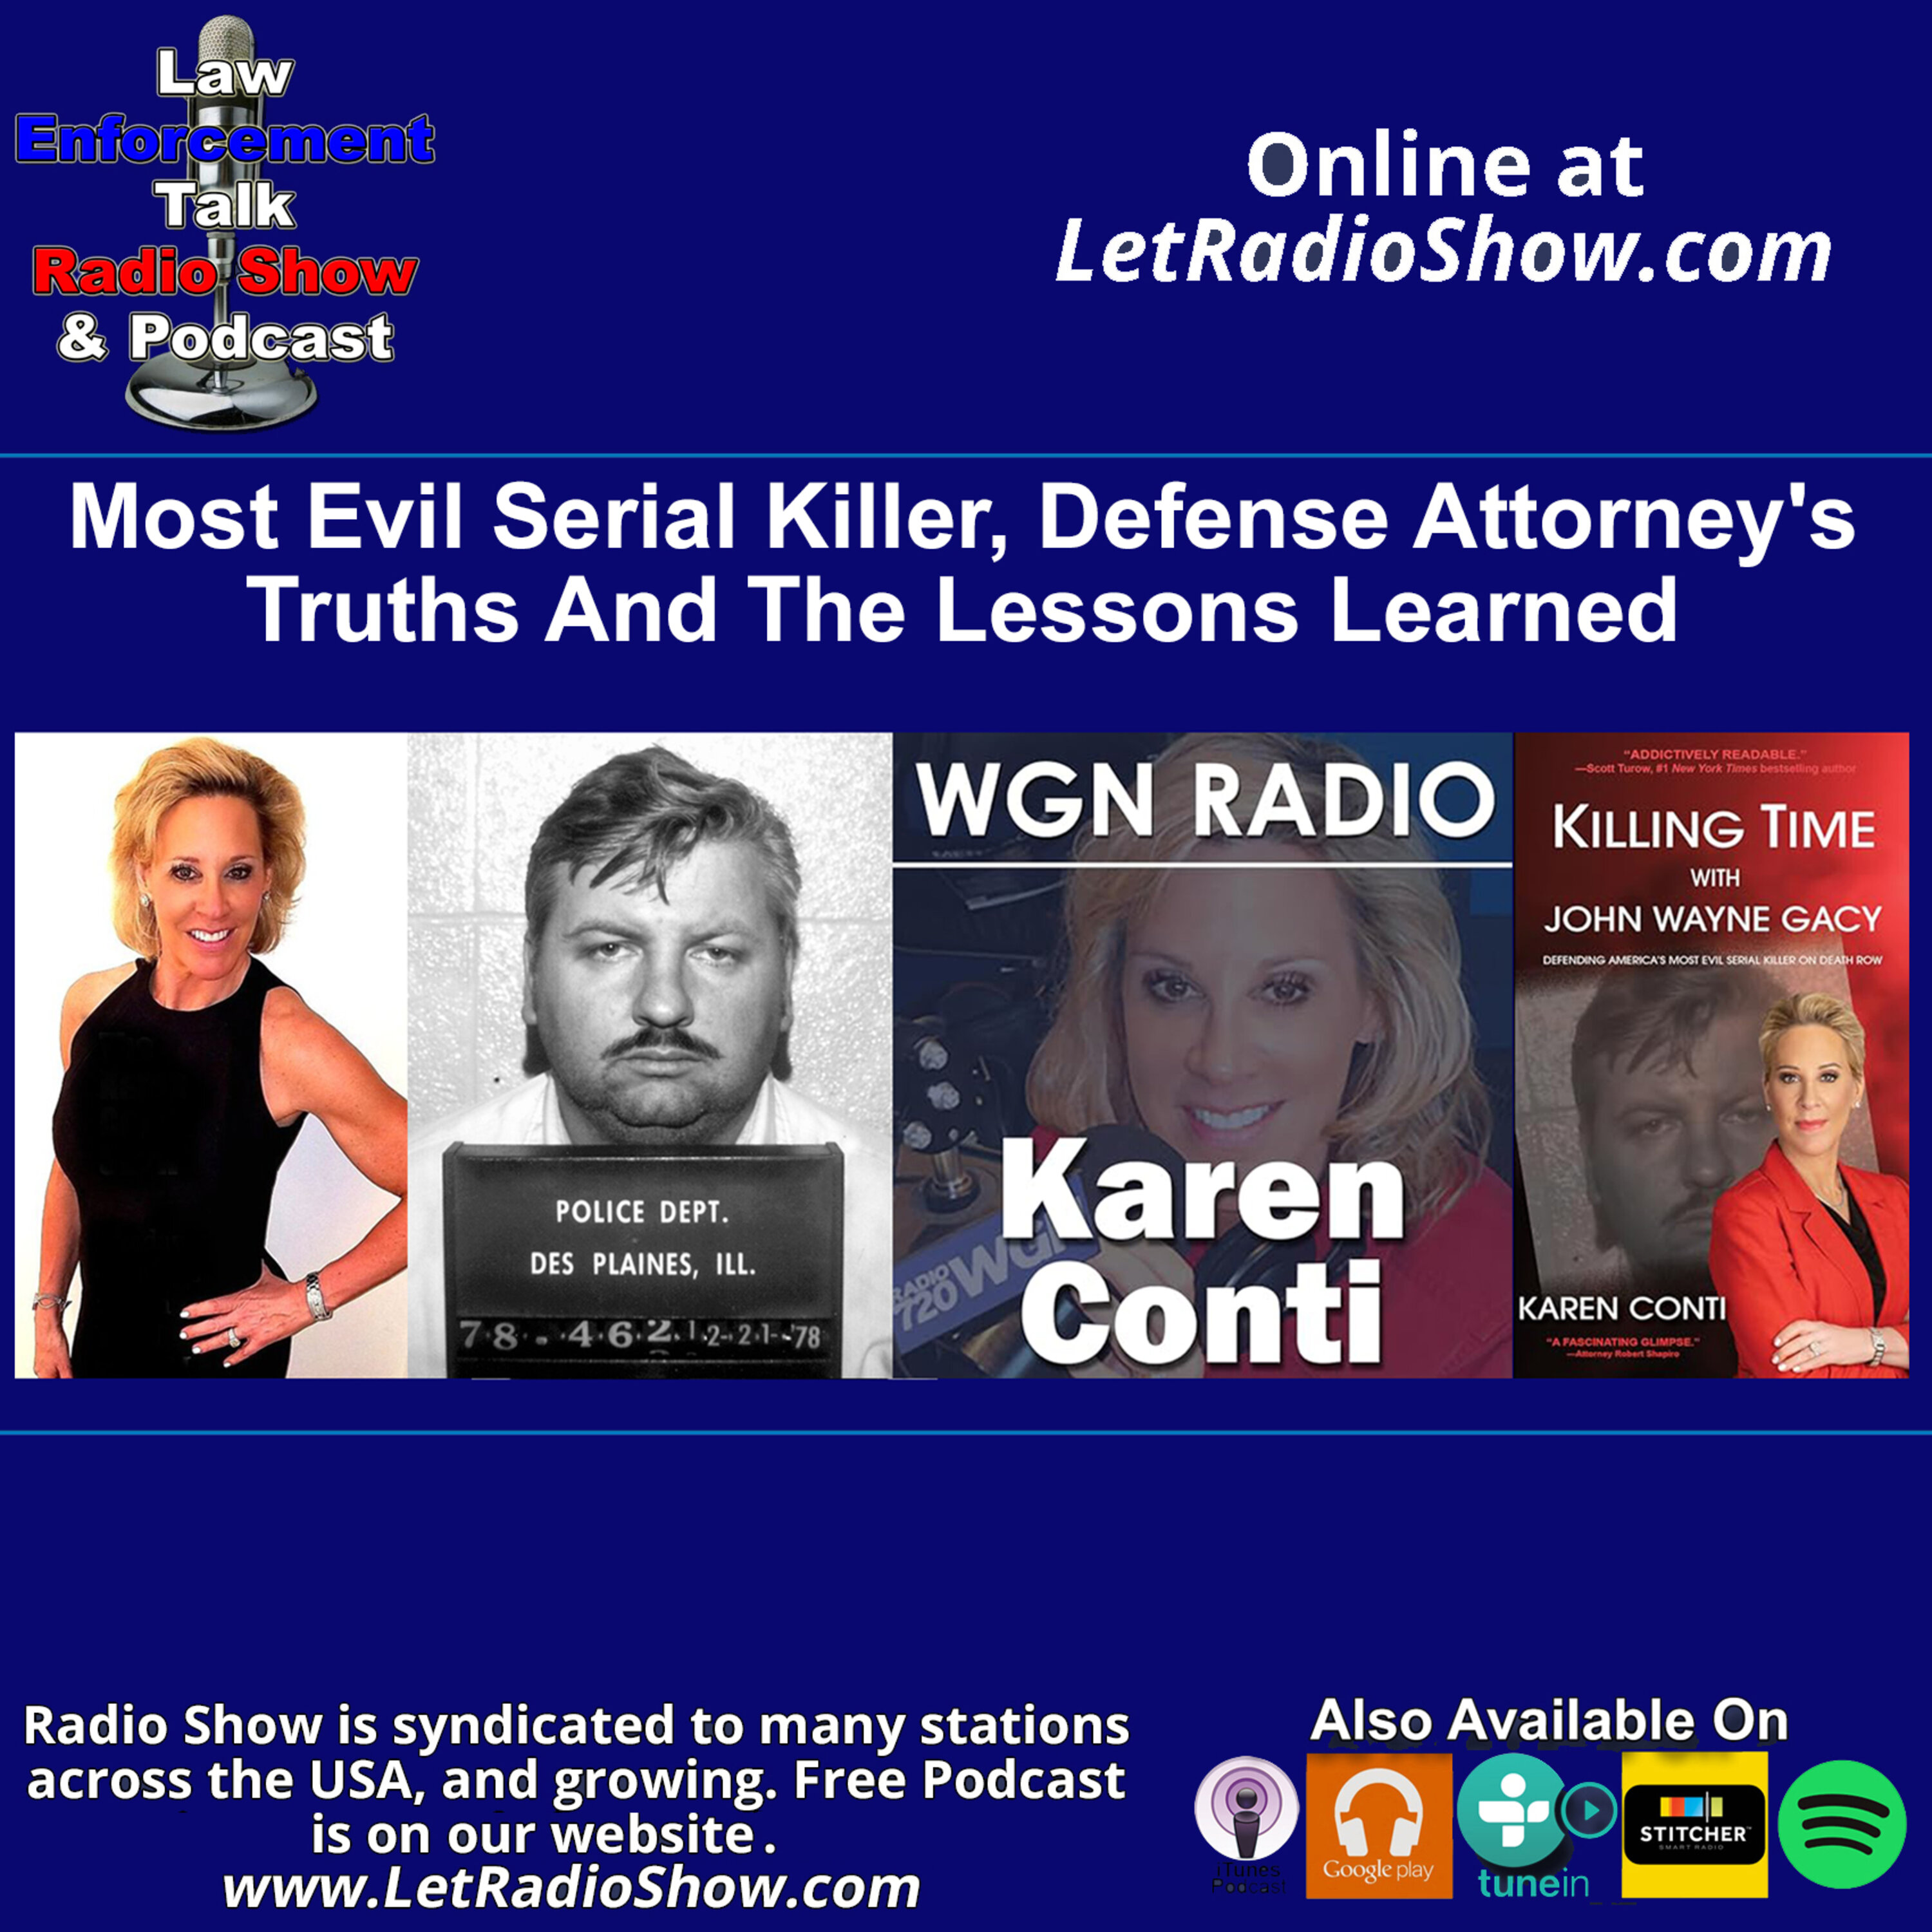 Most Evil Serial Killer, Defense Attorney's Truths and Lessons Learned